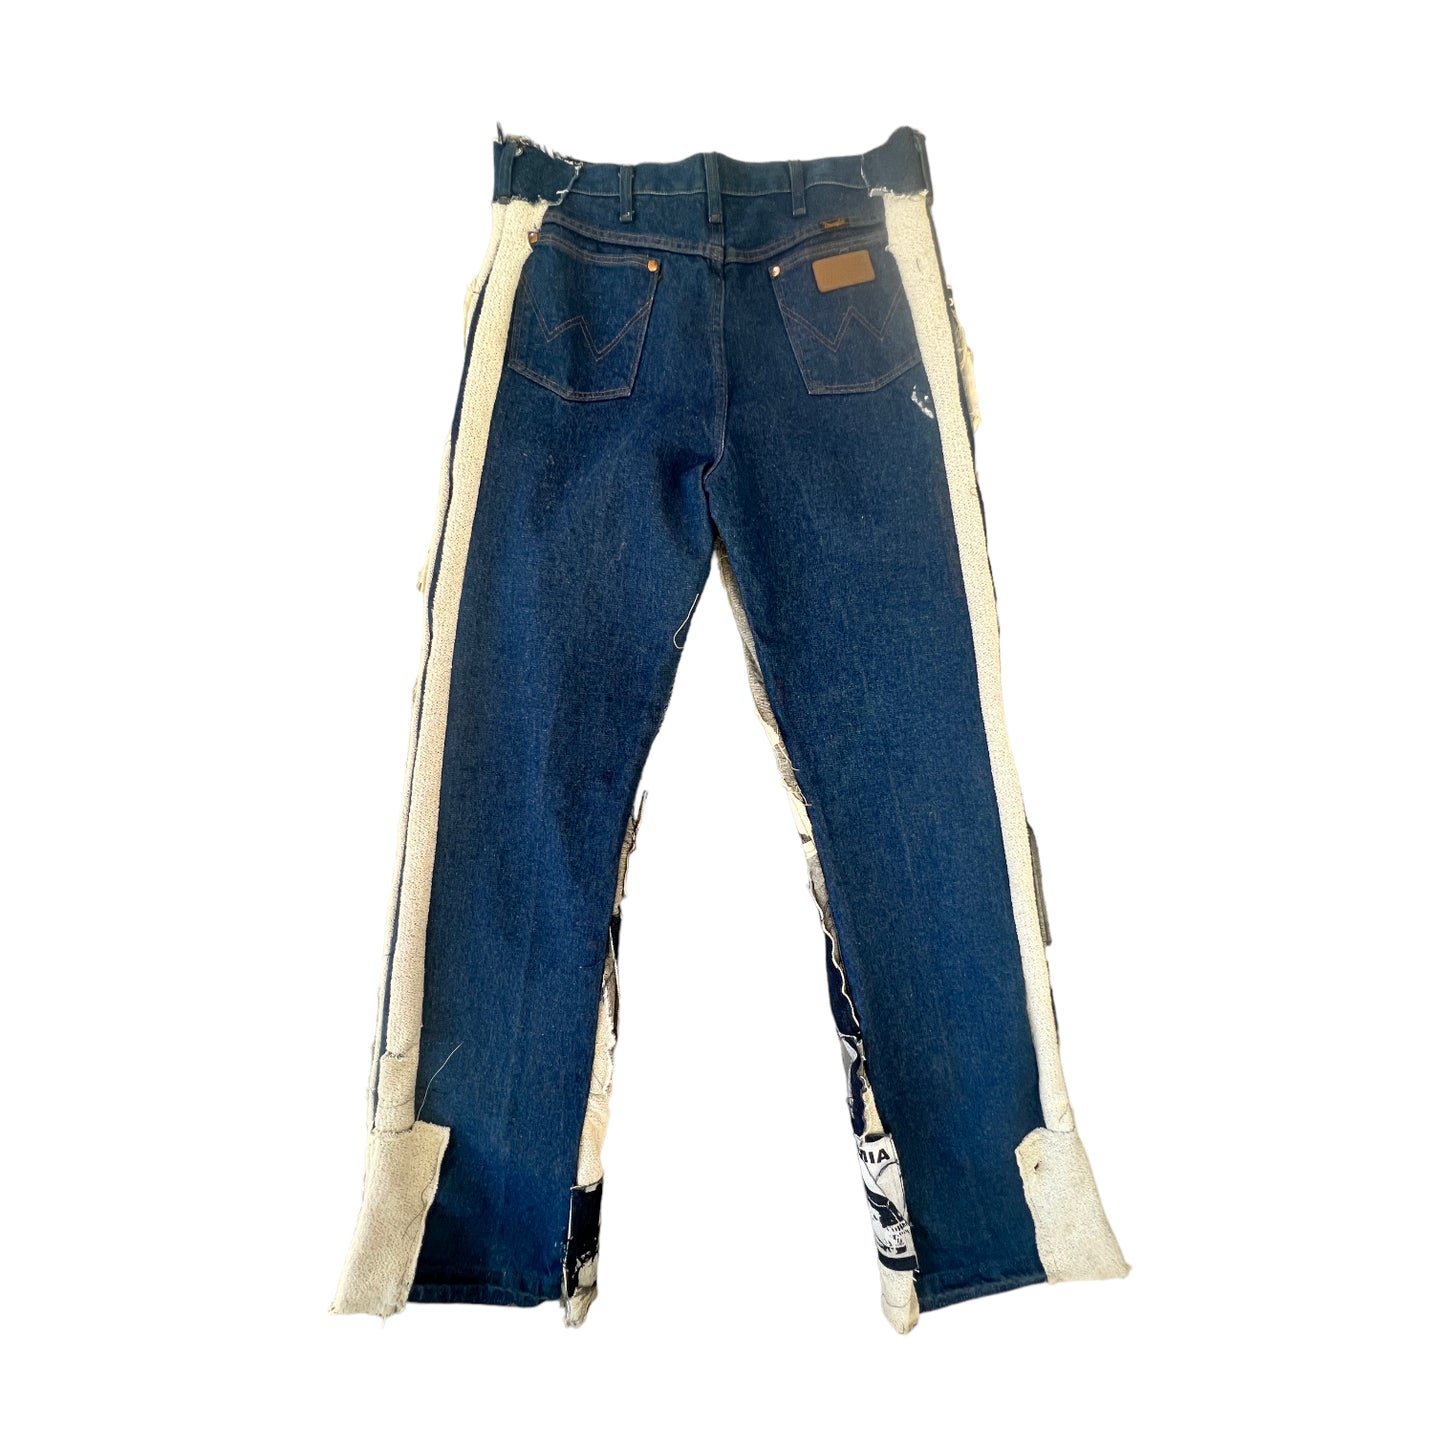 Toth 660 all over Detox Patched denim